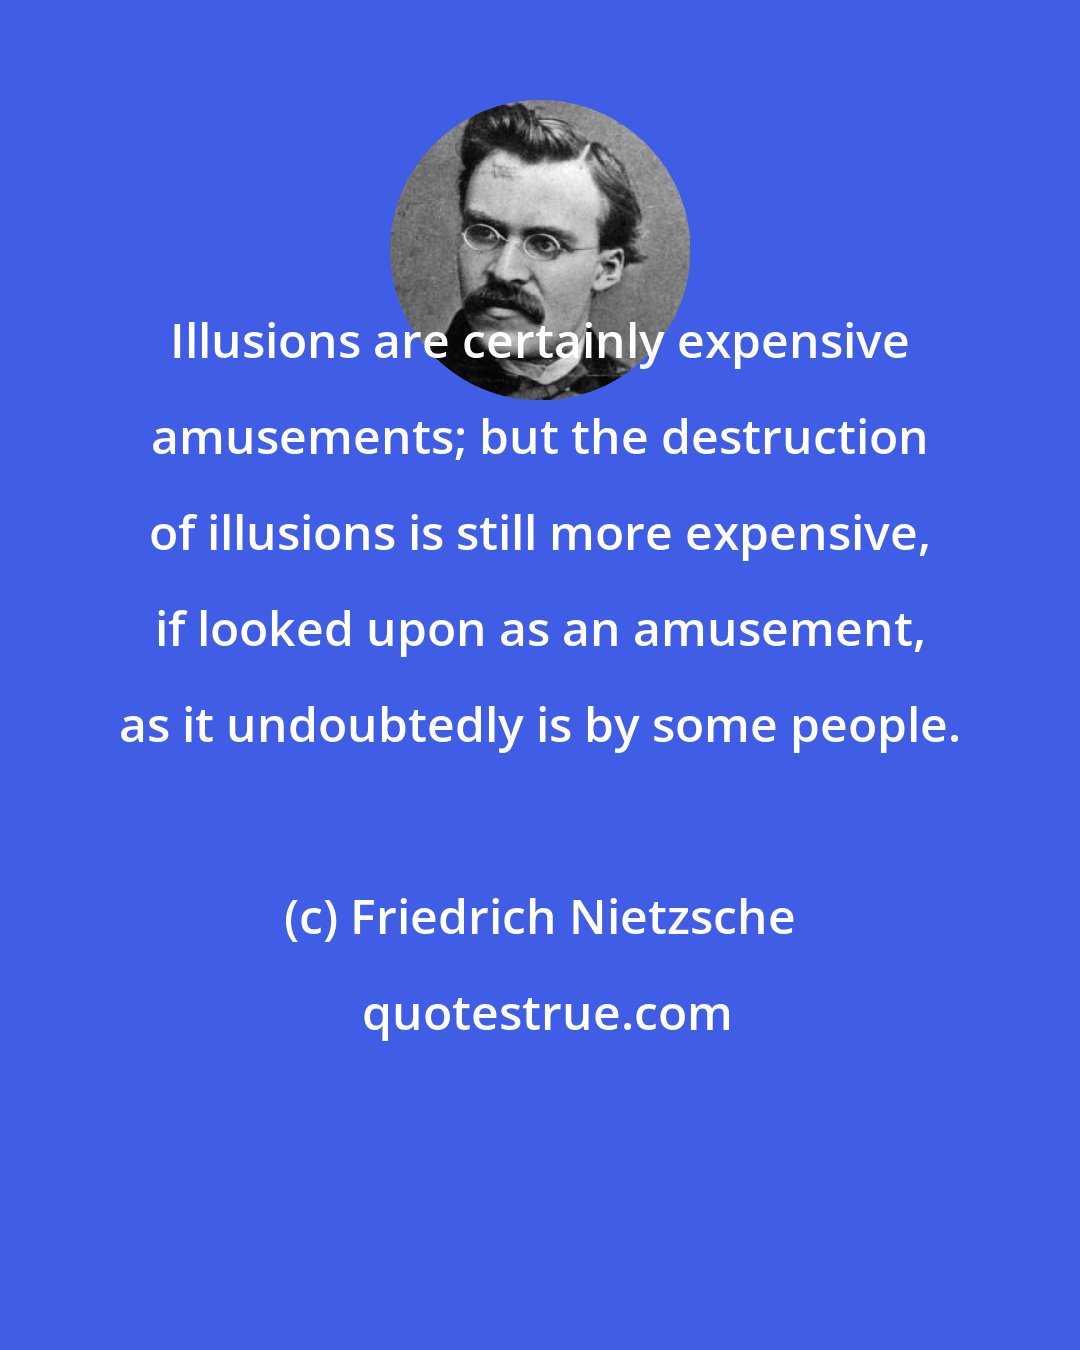 Friedrich Nietzsche: Illusions are certainly expensive amusements; but the destruction of illusions is still more expensive, if looked upon as an amusement, as it undoubtedly is by some people.